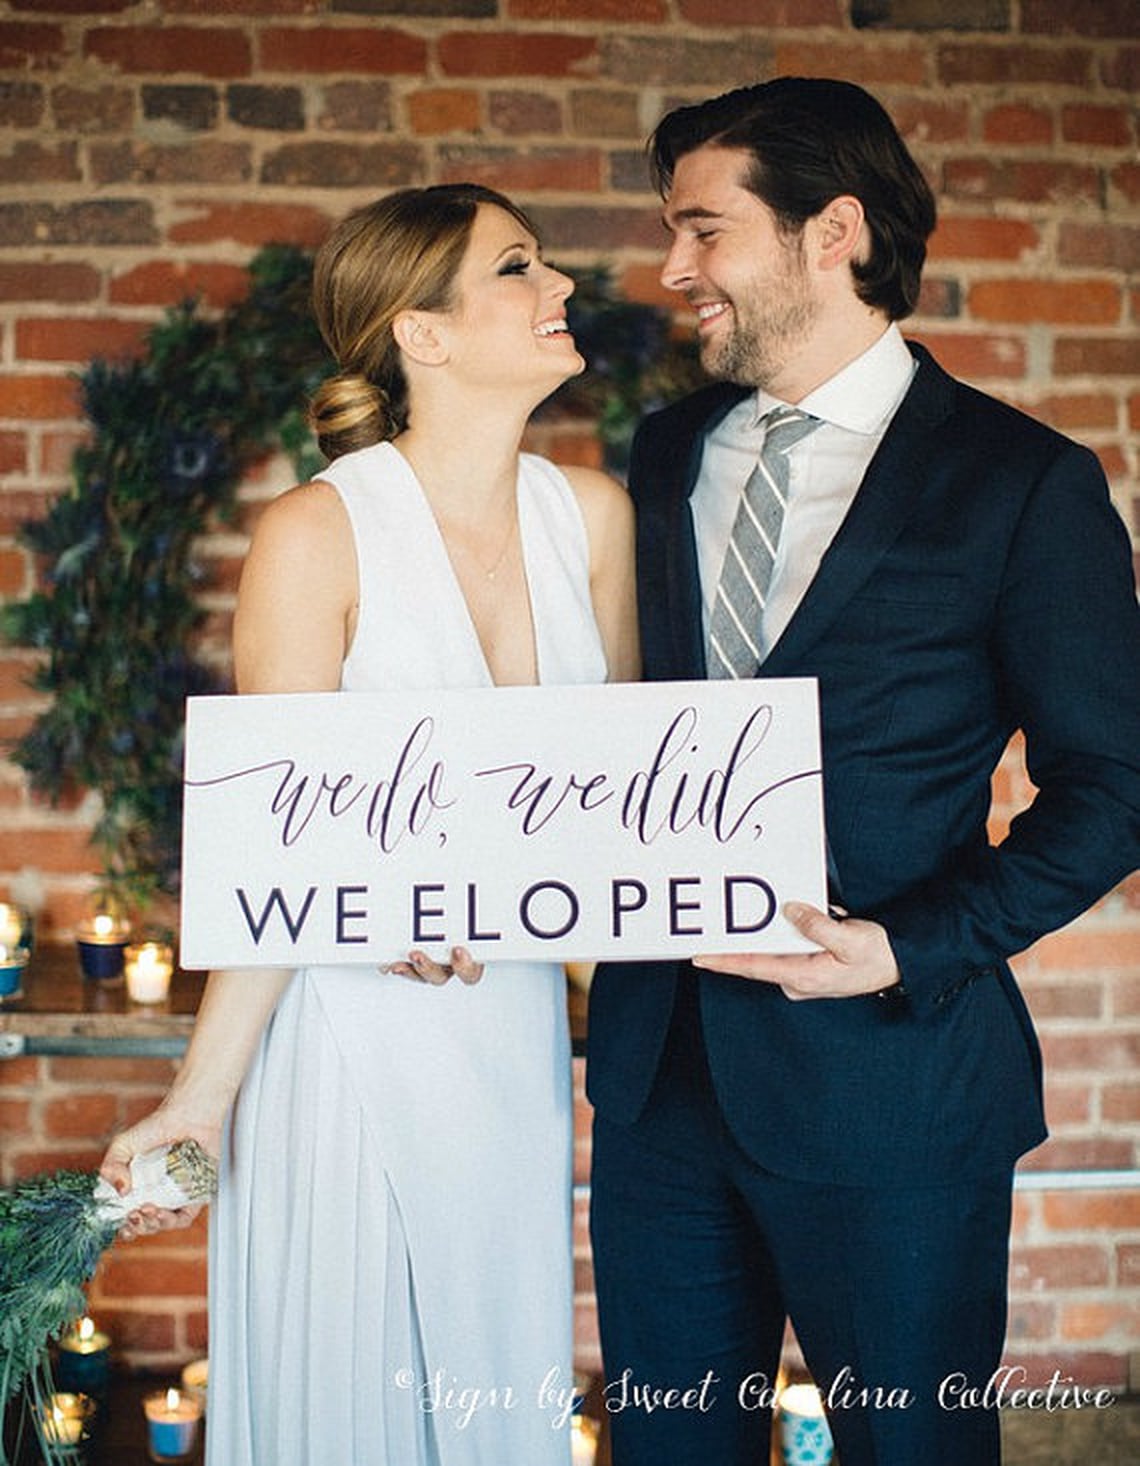 Ways To Announce Your Elopement Popsugar Love And Sex 9676